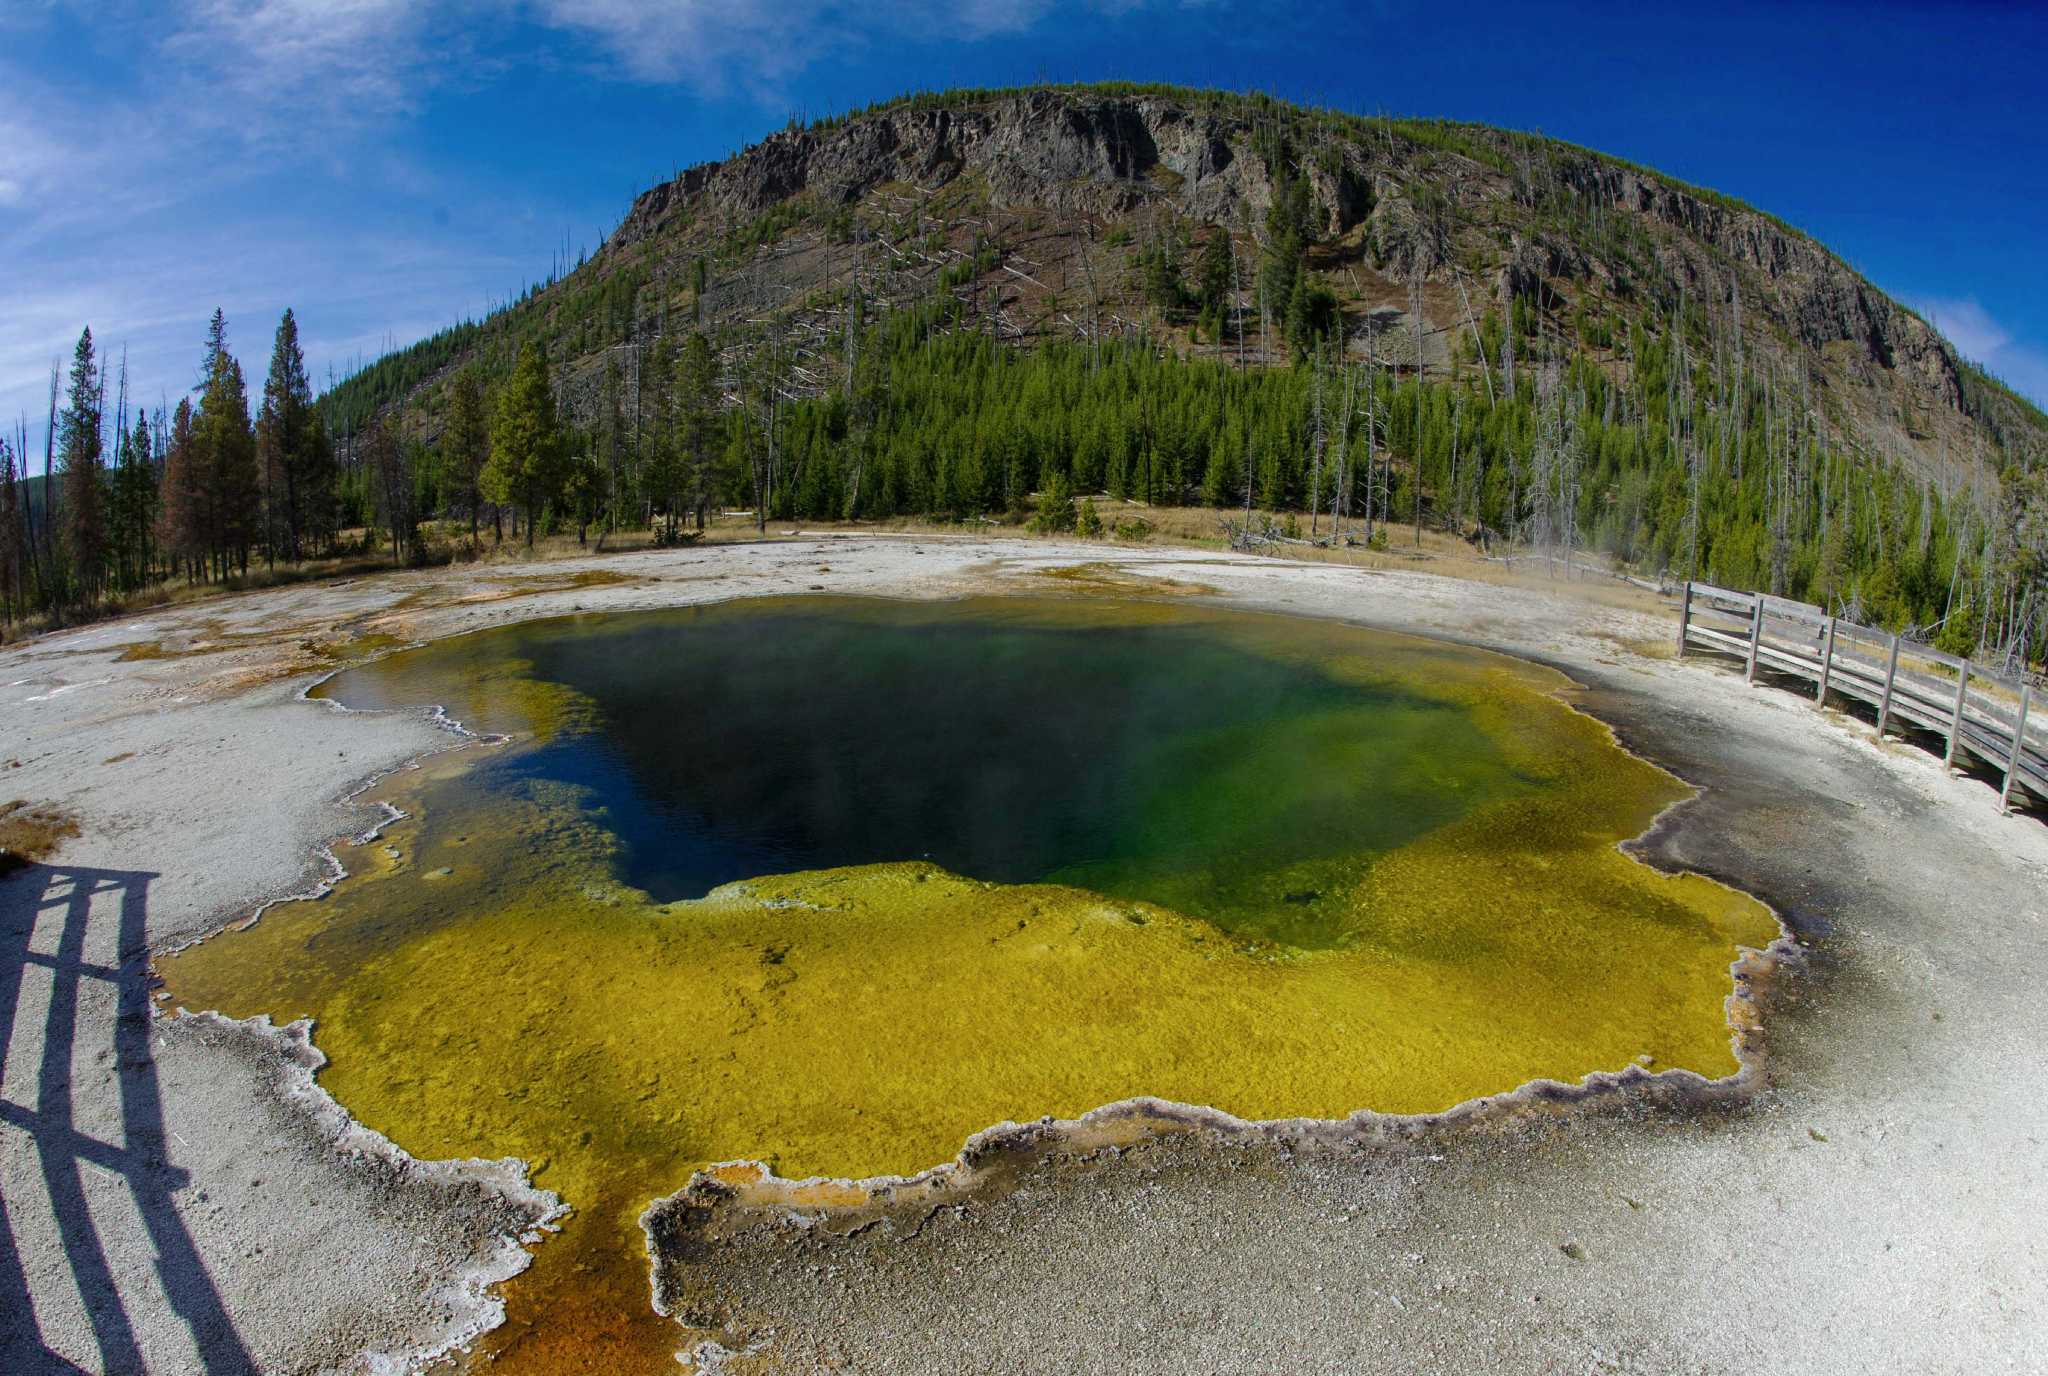 Oregon man's gruesome hot spring death highlights problems at Yellowst...